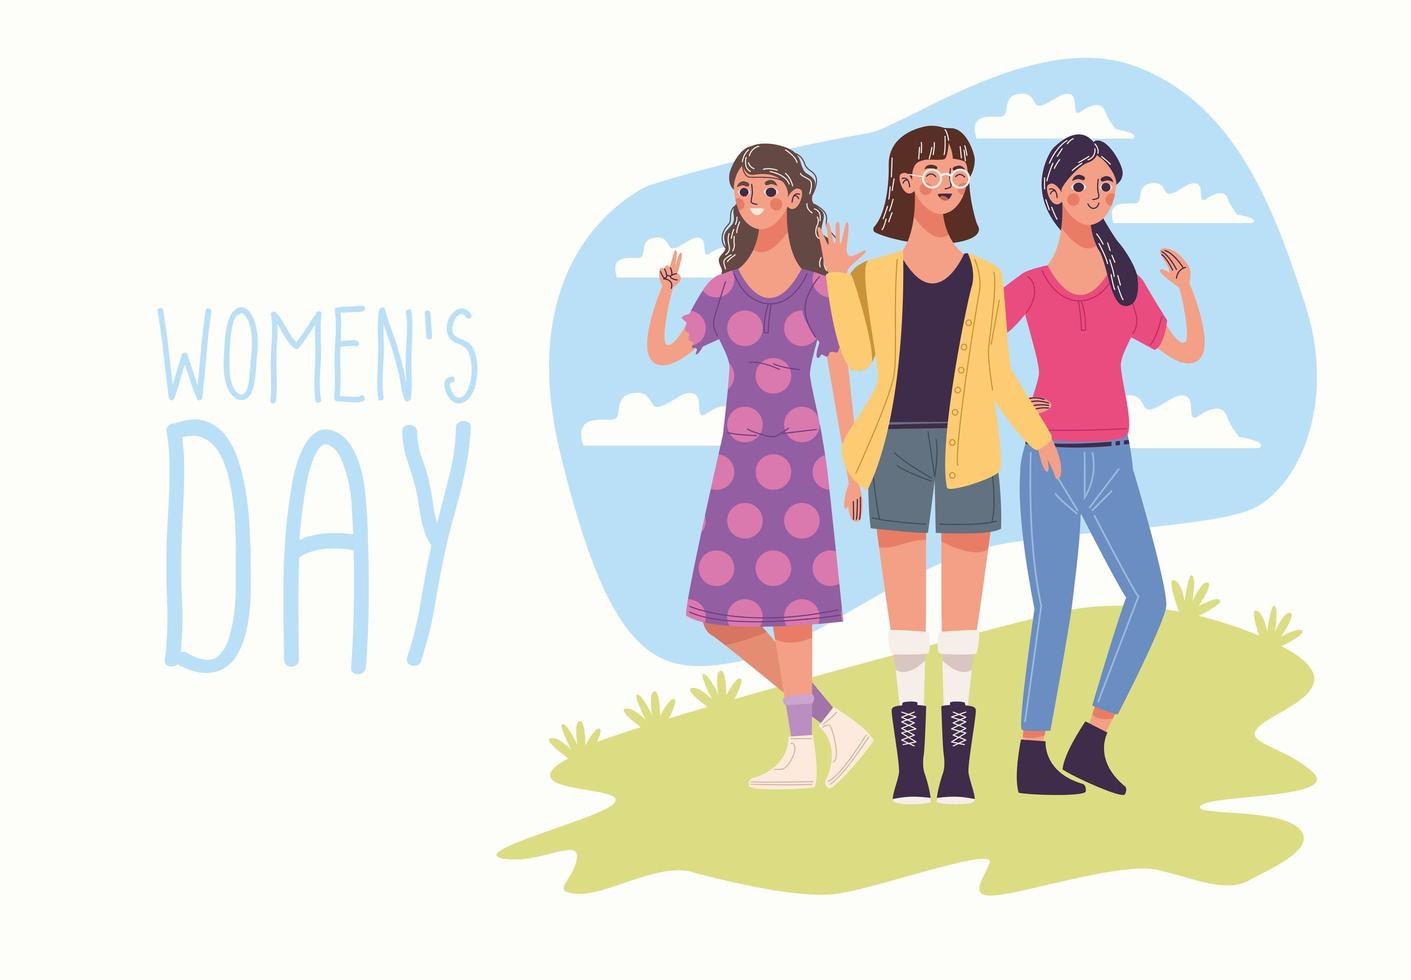 womens day with group of three young women characters vector